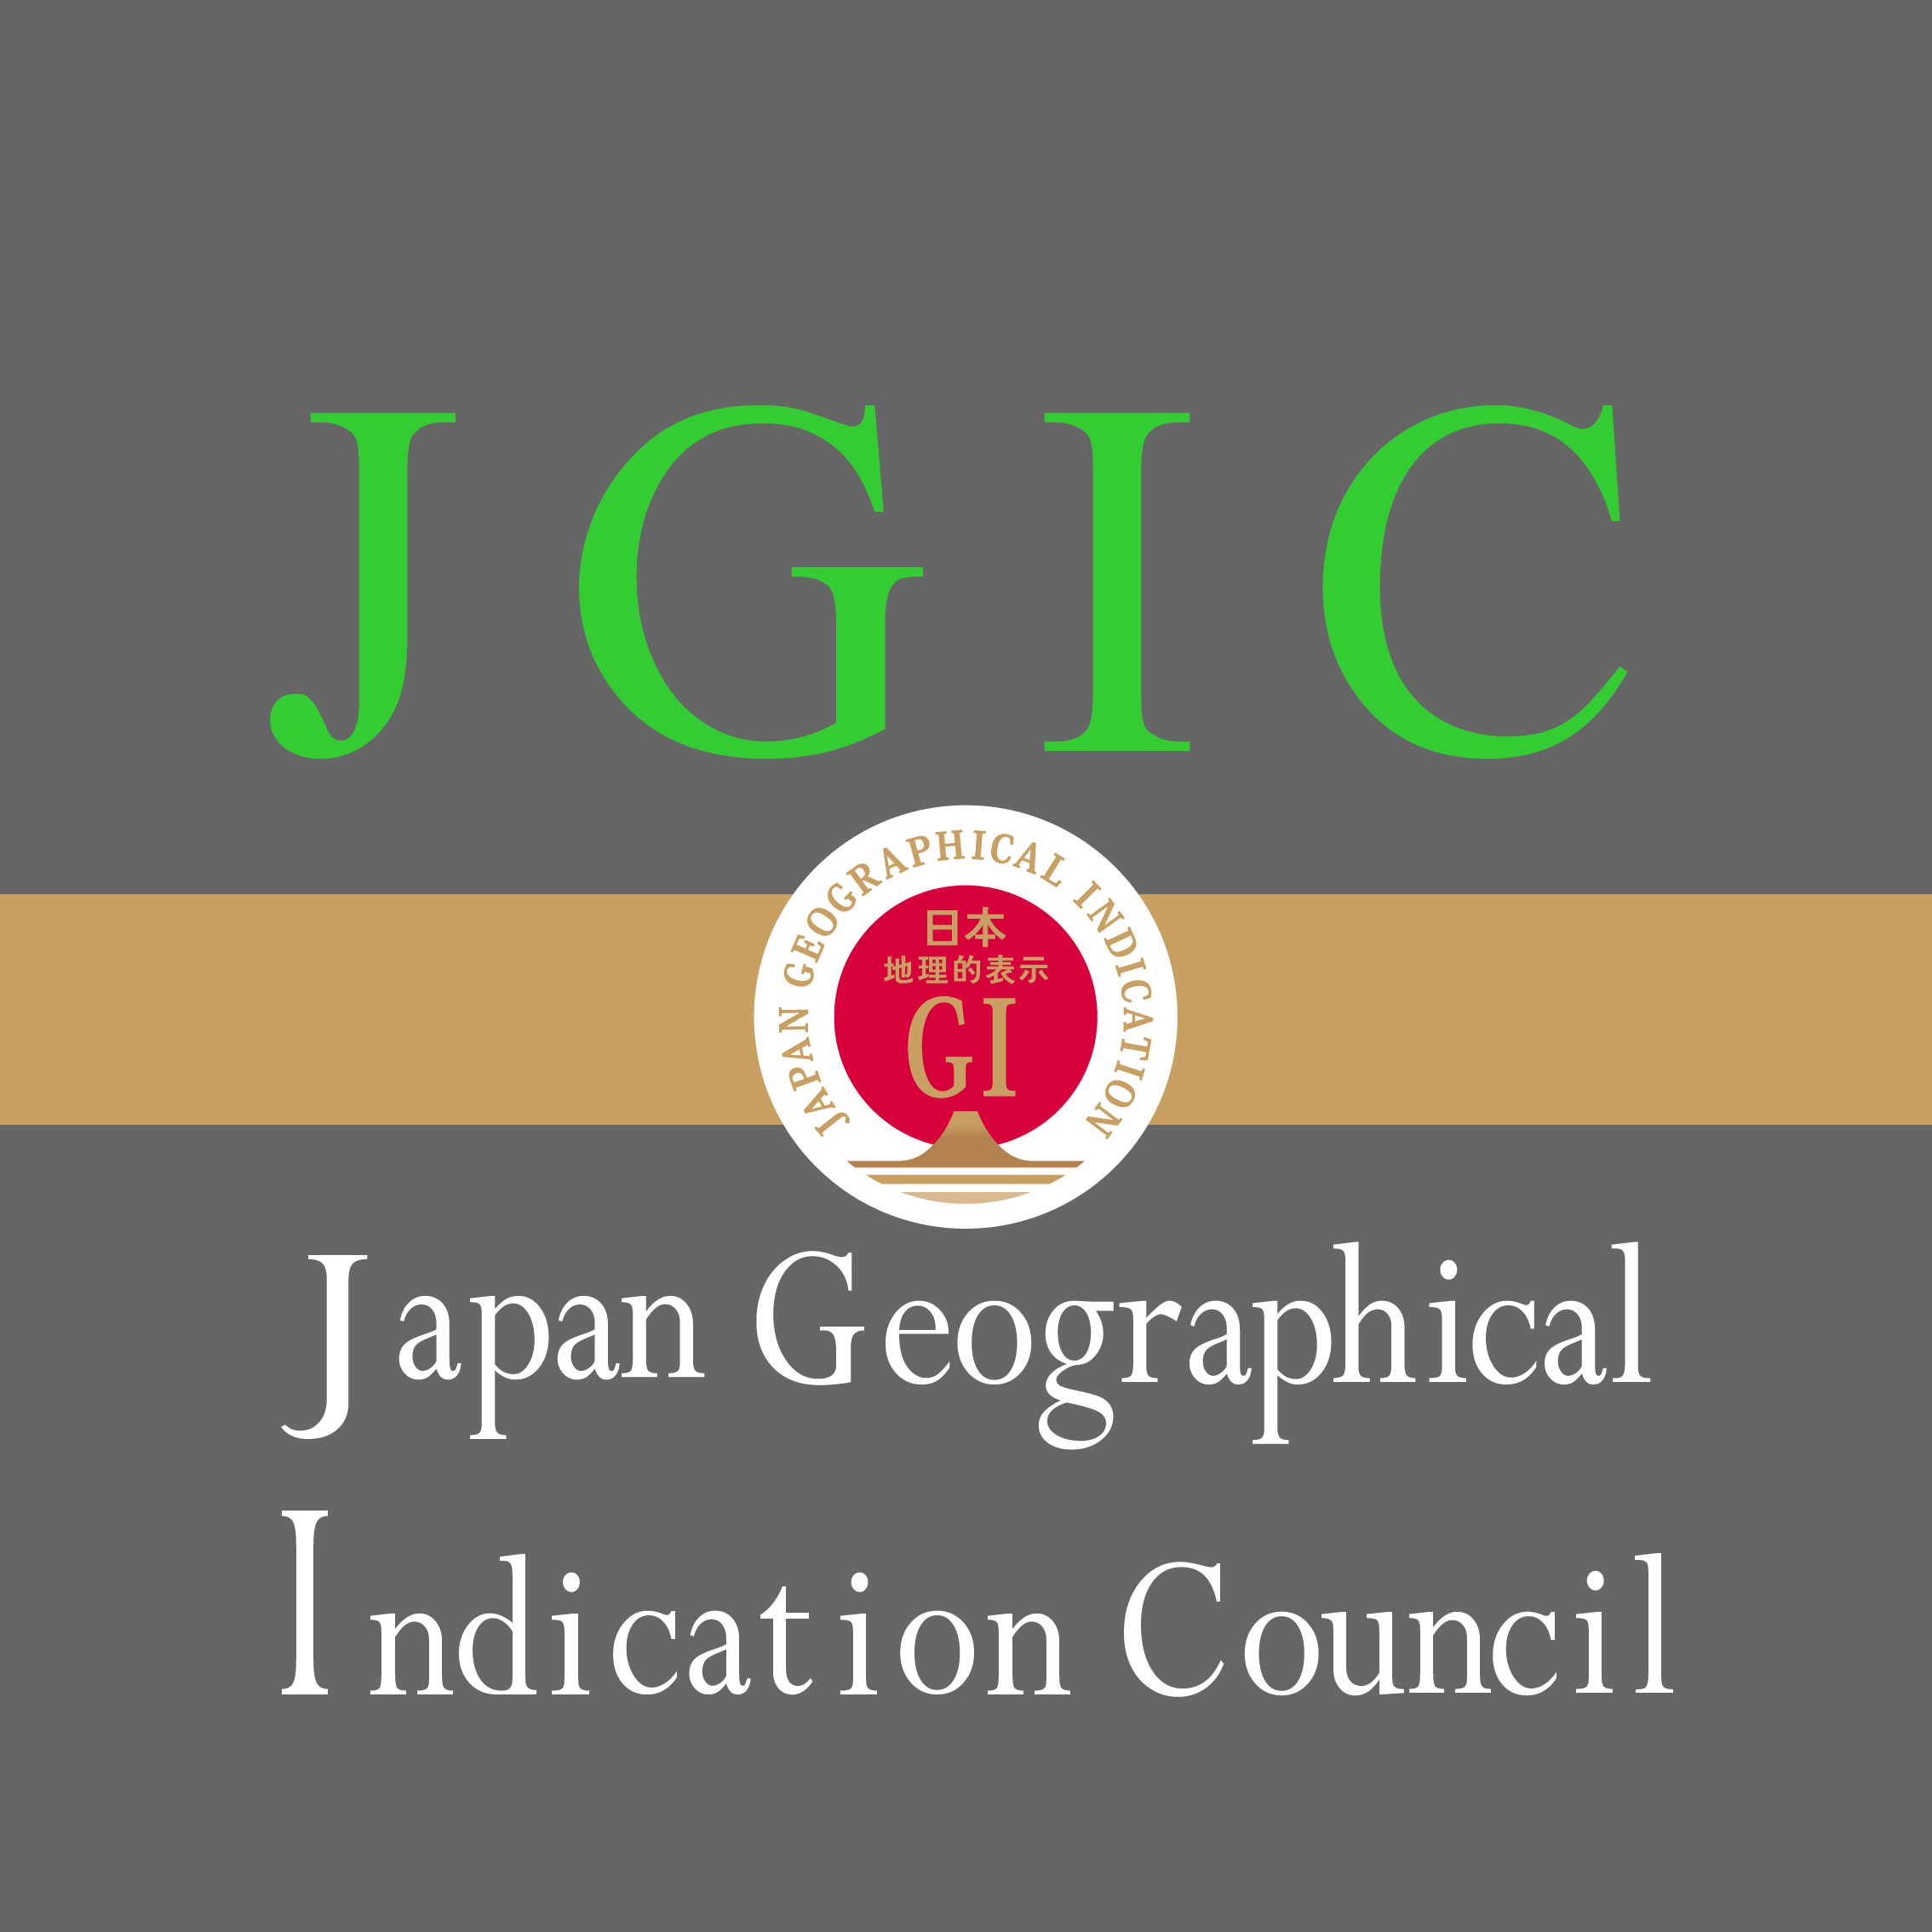 Japan Geographical Indication Council